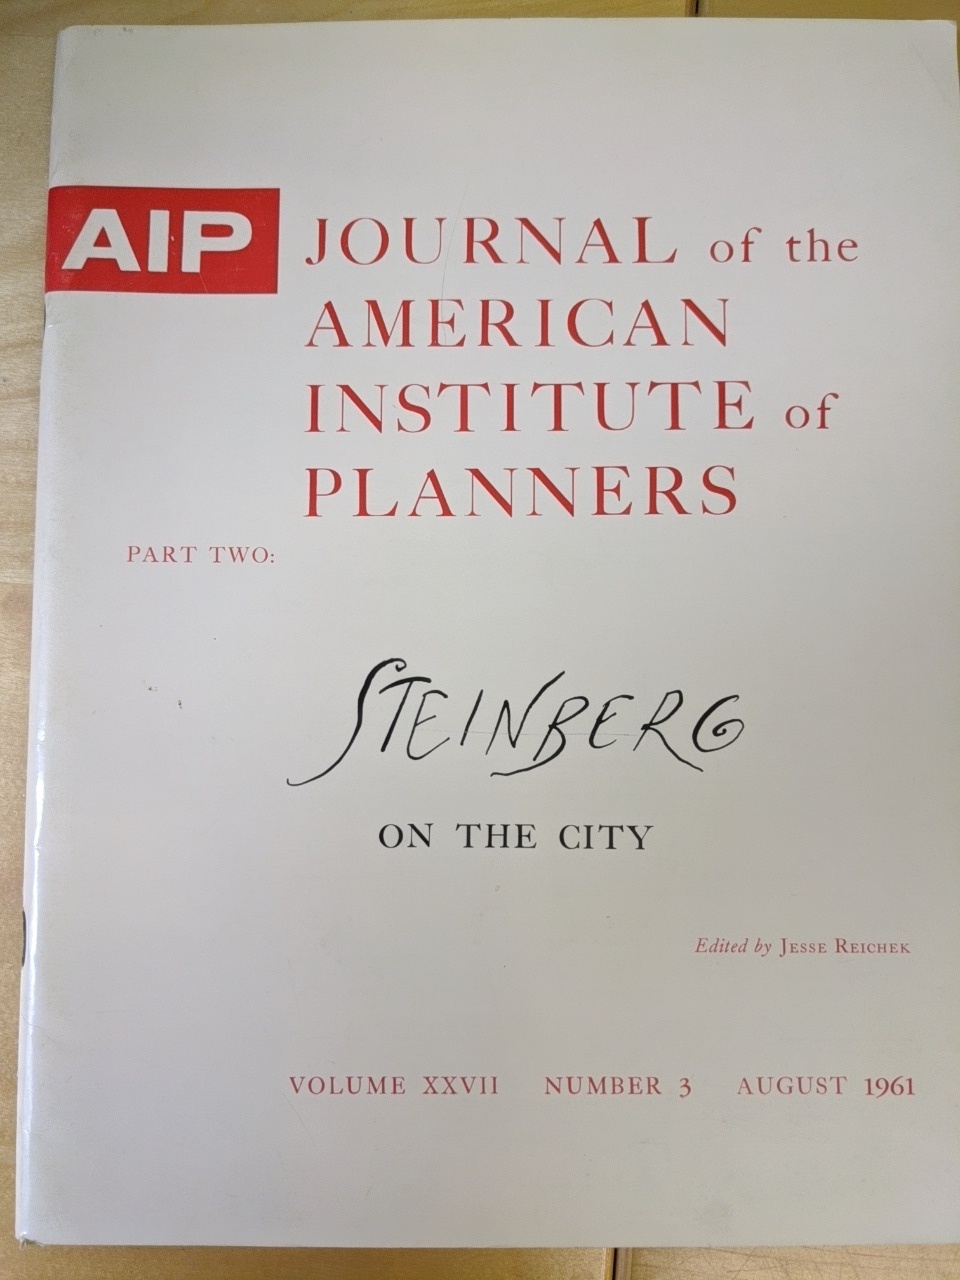 Reichek, Jesse (ed.):  Steinberg on the City. Part Two. (=Journal of the American Institute of Planners Volume XXVII, Number 3, August 1961. 